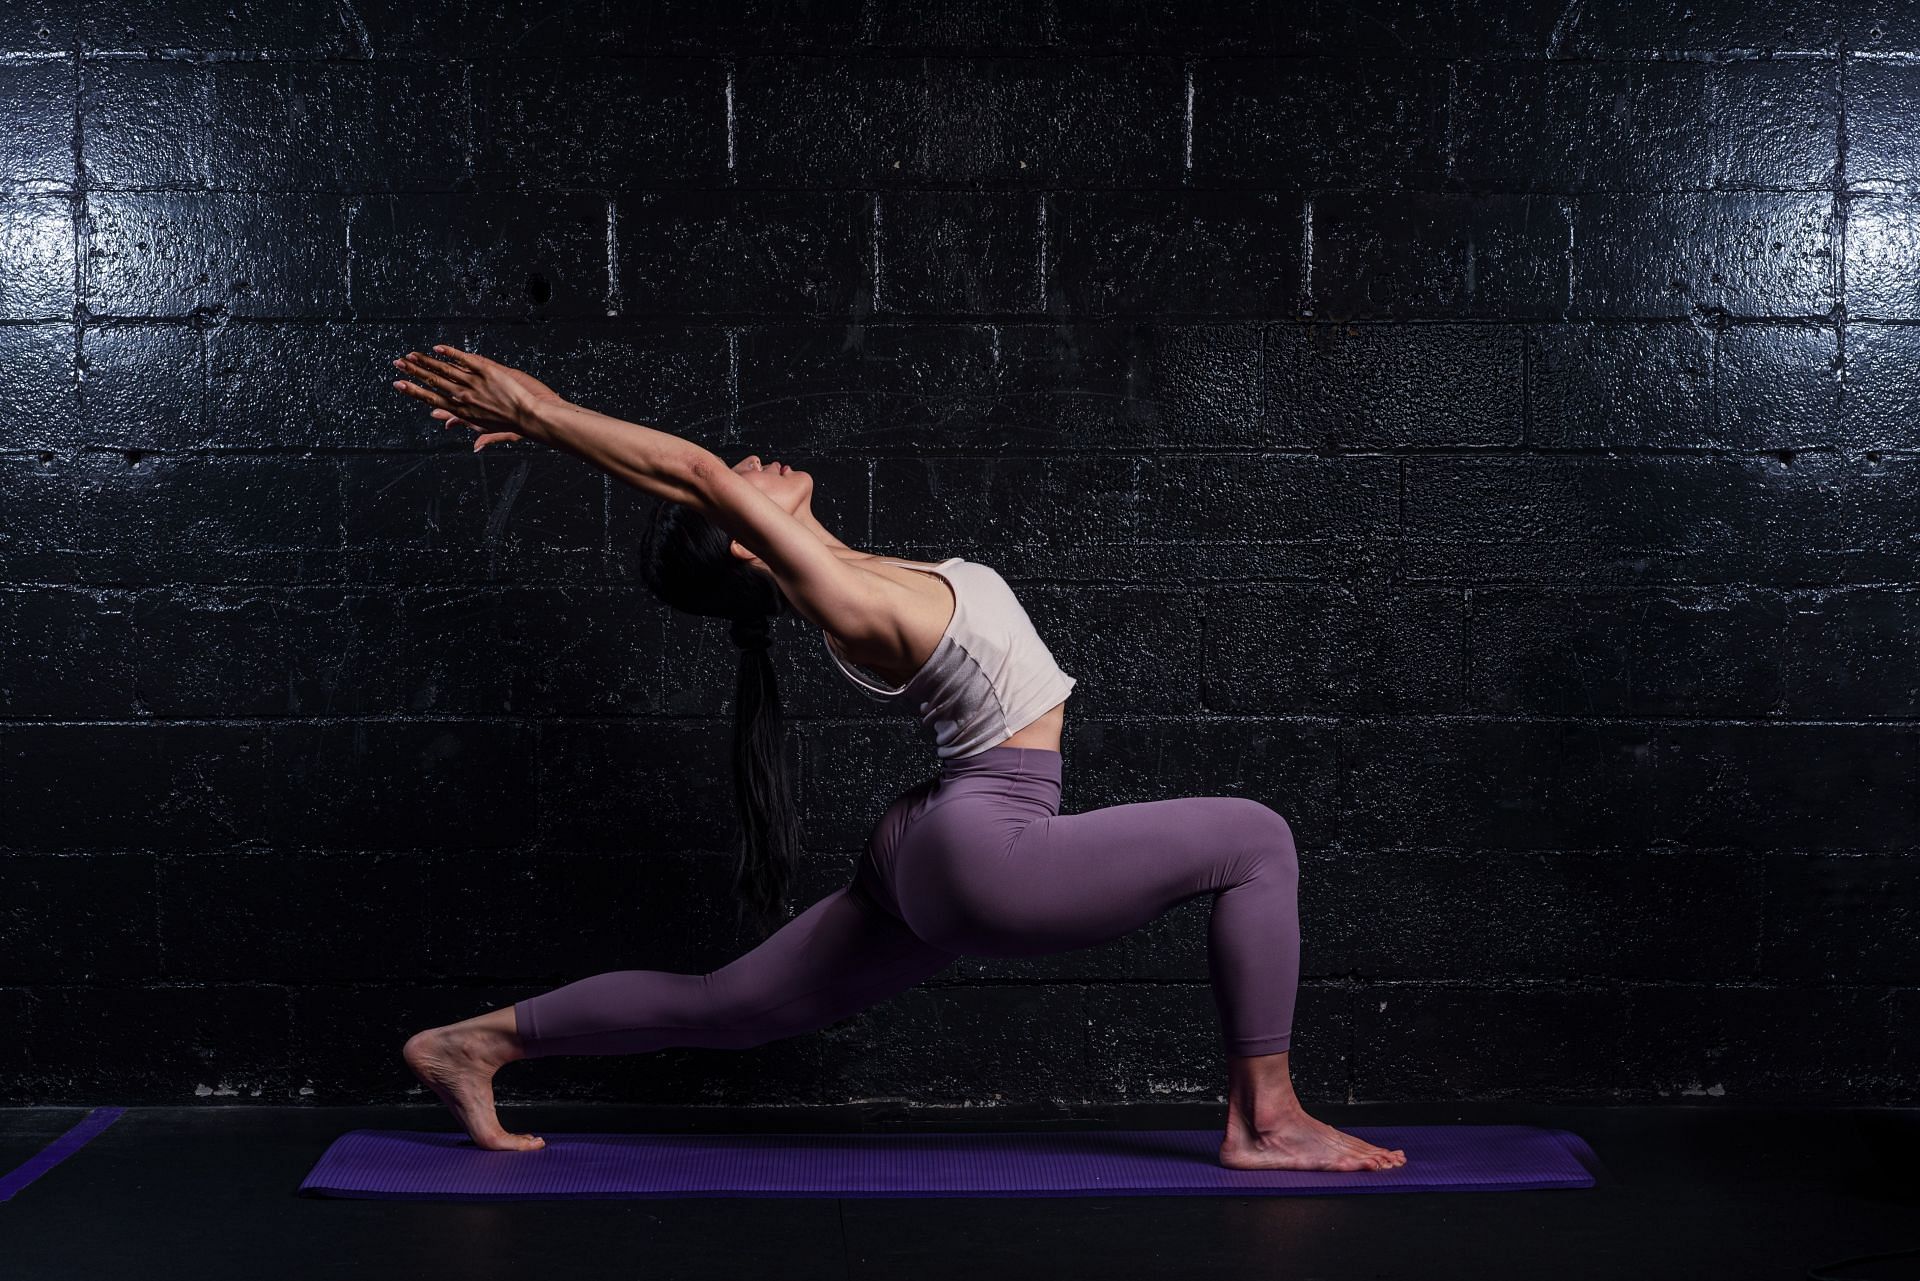 Yoga is one of the best way to tone and reduce the thigh fat. (Image via Unsplash /HFECO Studio)